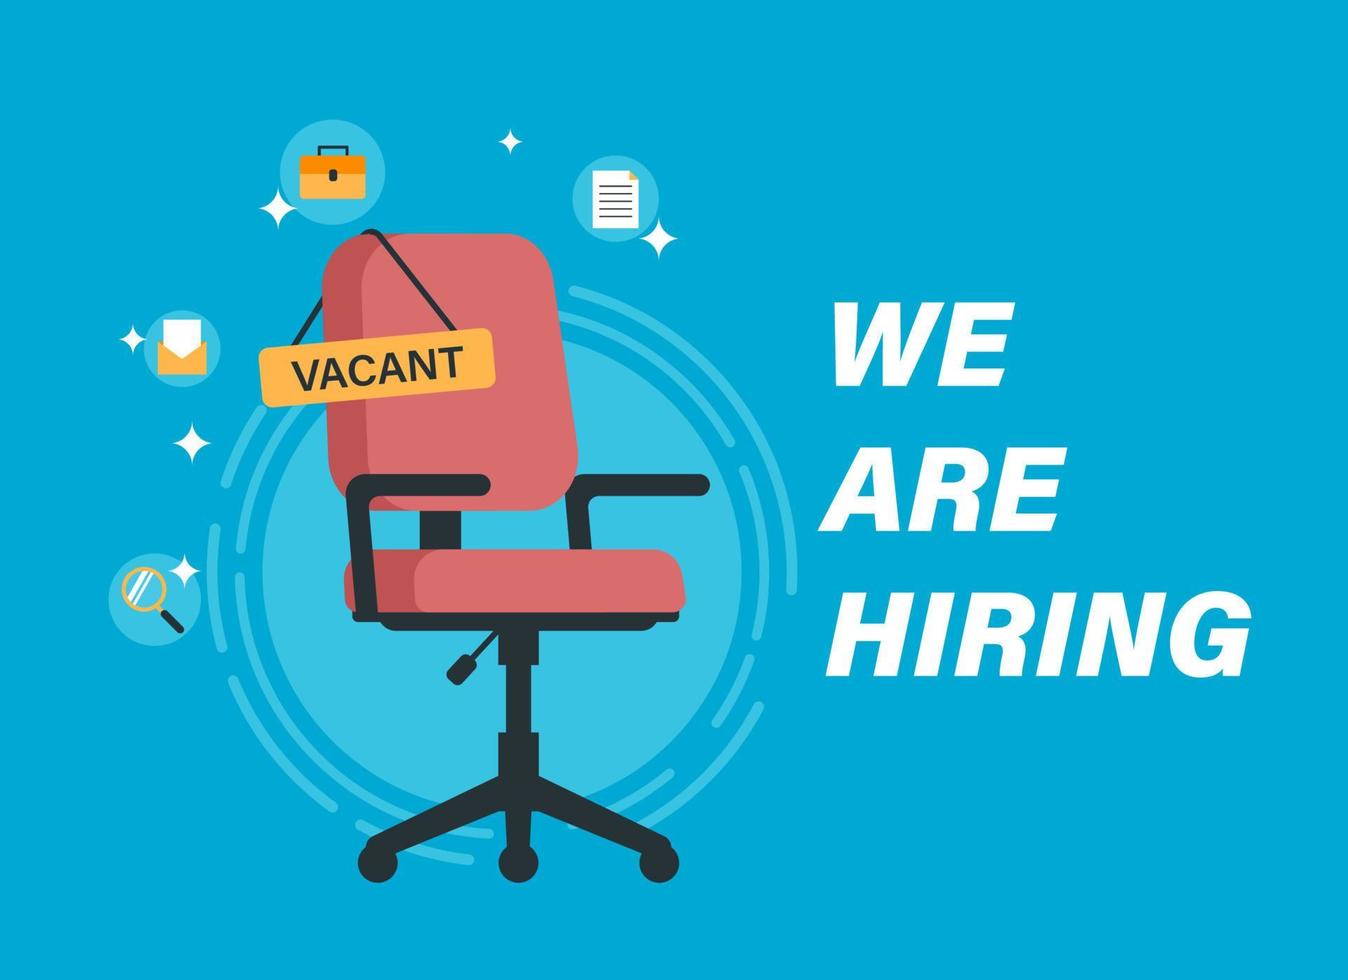 We are hiring concept with red office chair illustration vector